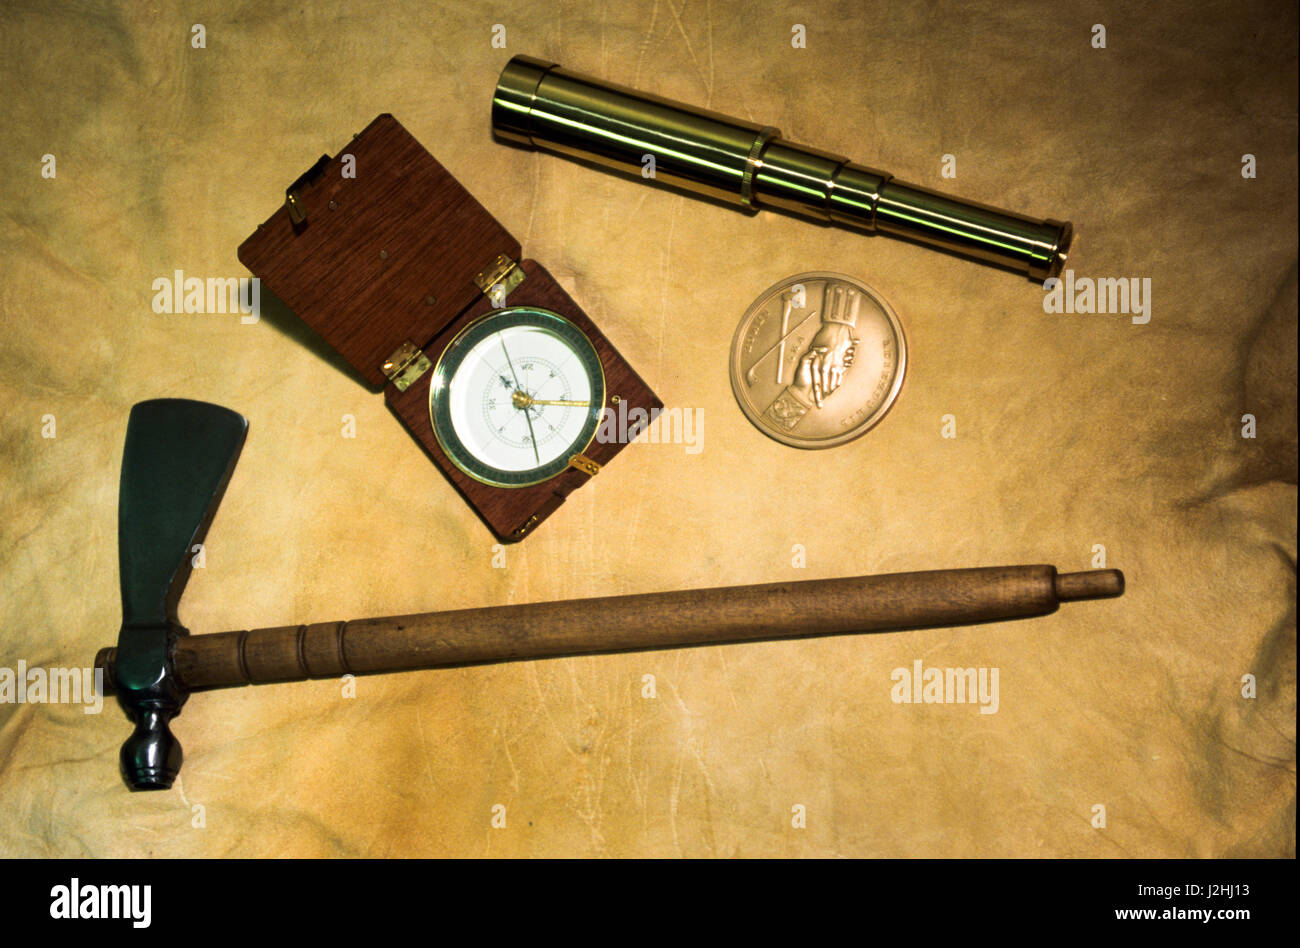 Lewis Clark Compass High Resolution Stock Photography and Images - Alamy